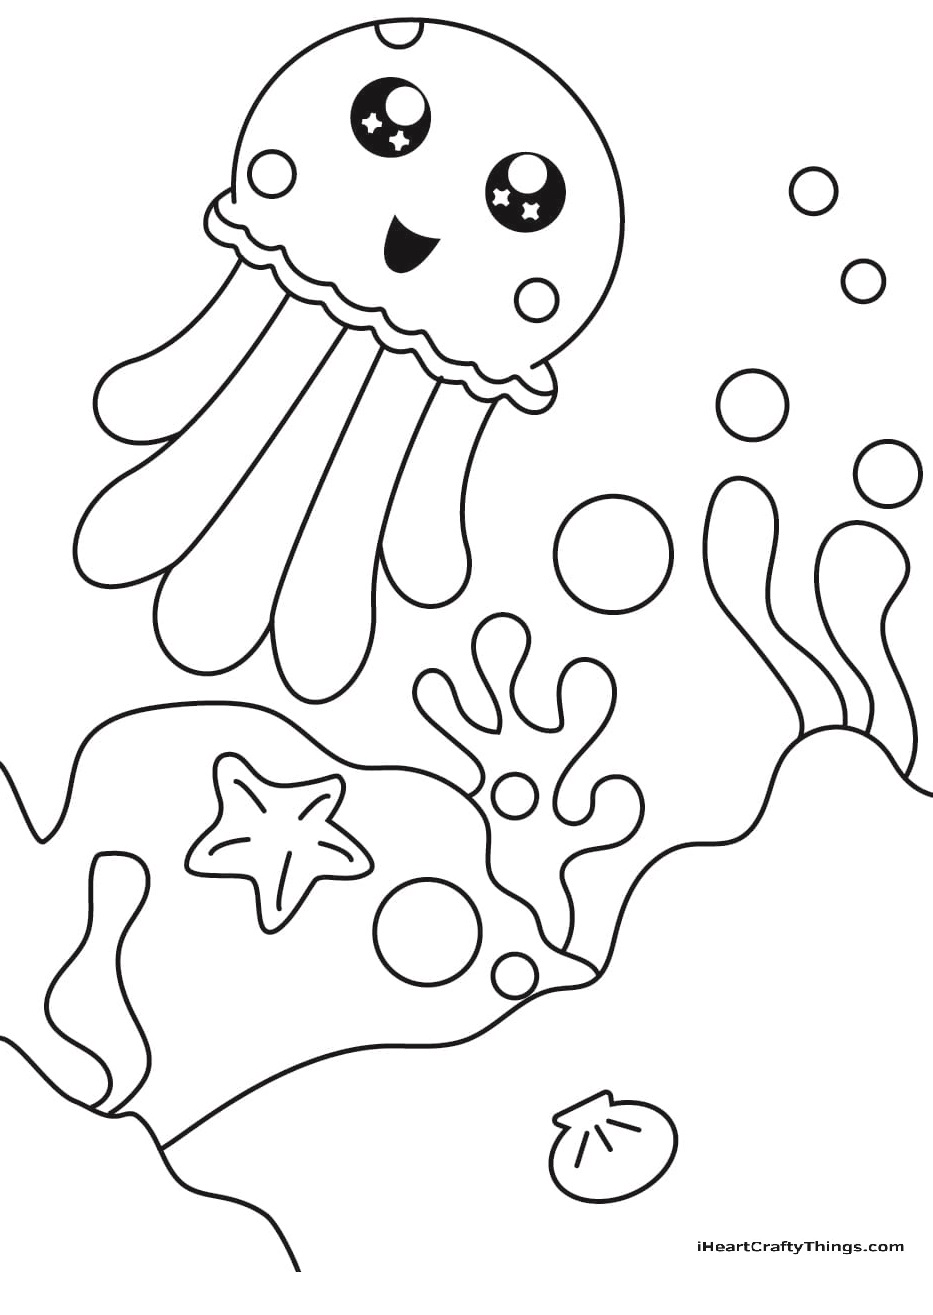 Jellyfish for Coloring